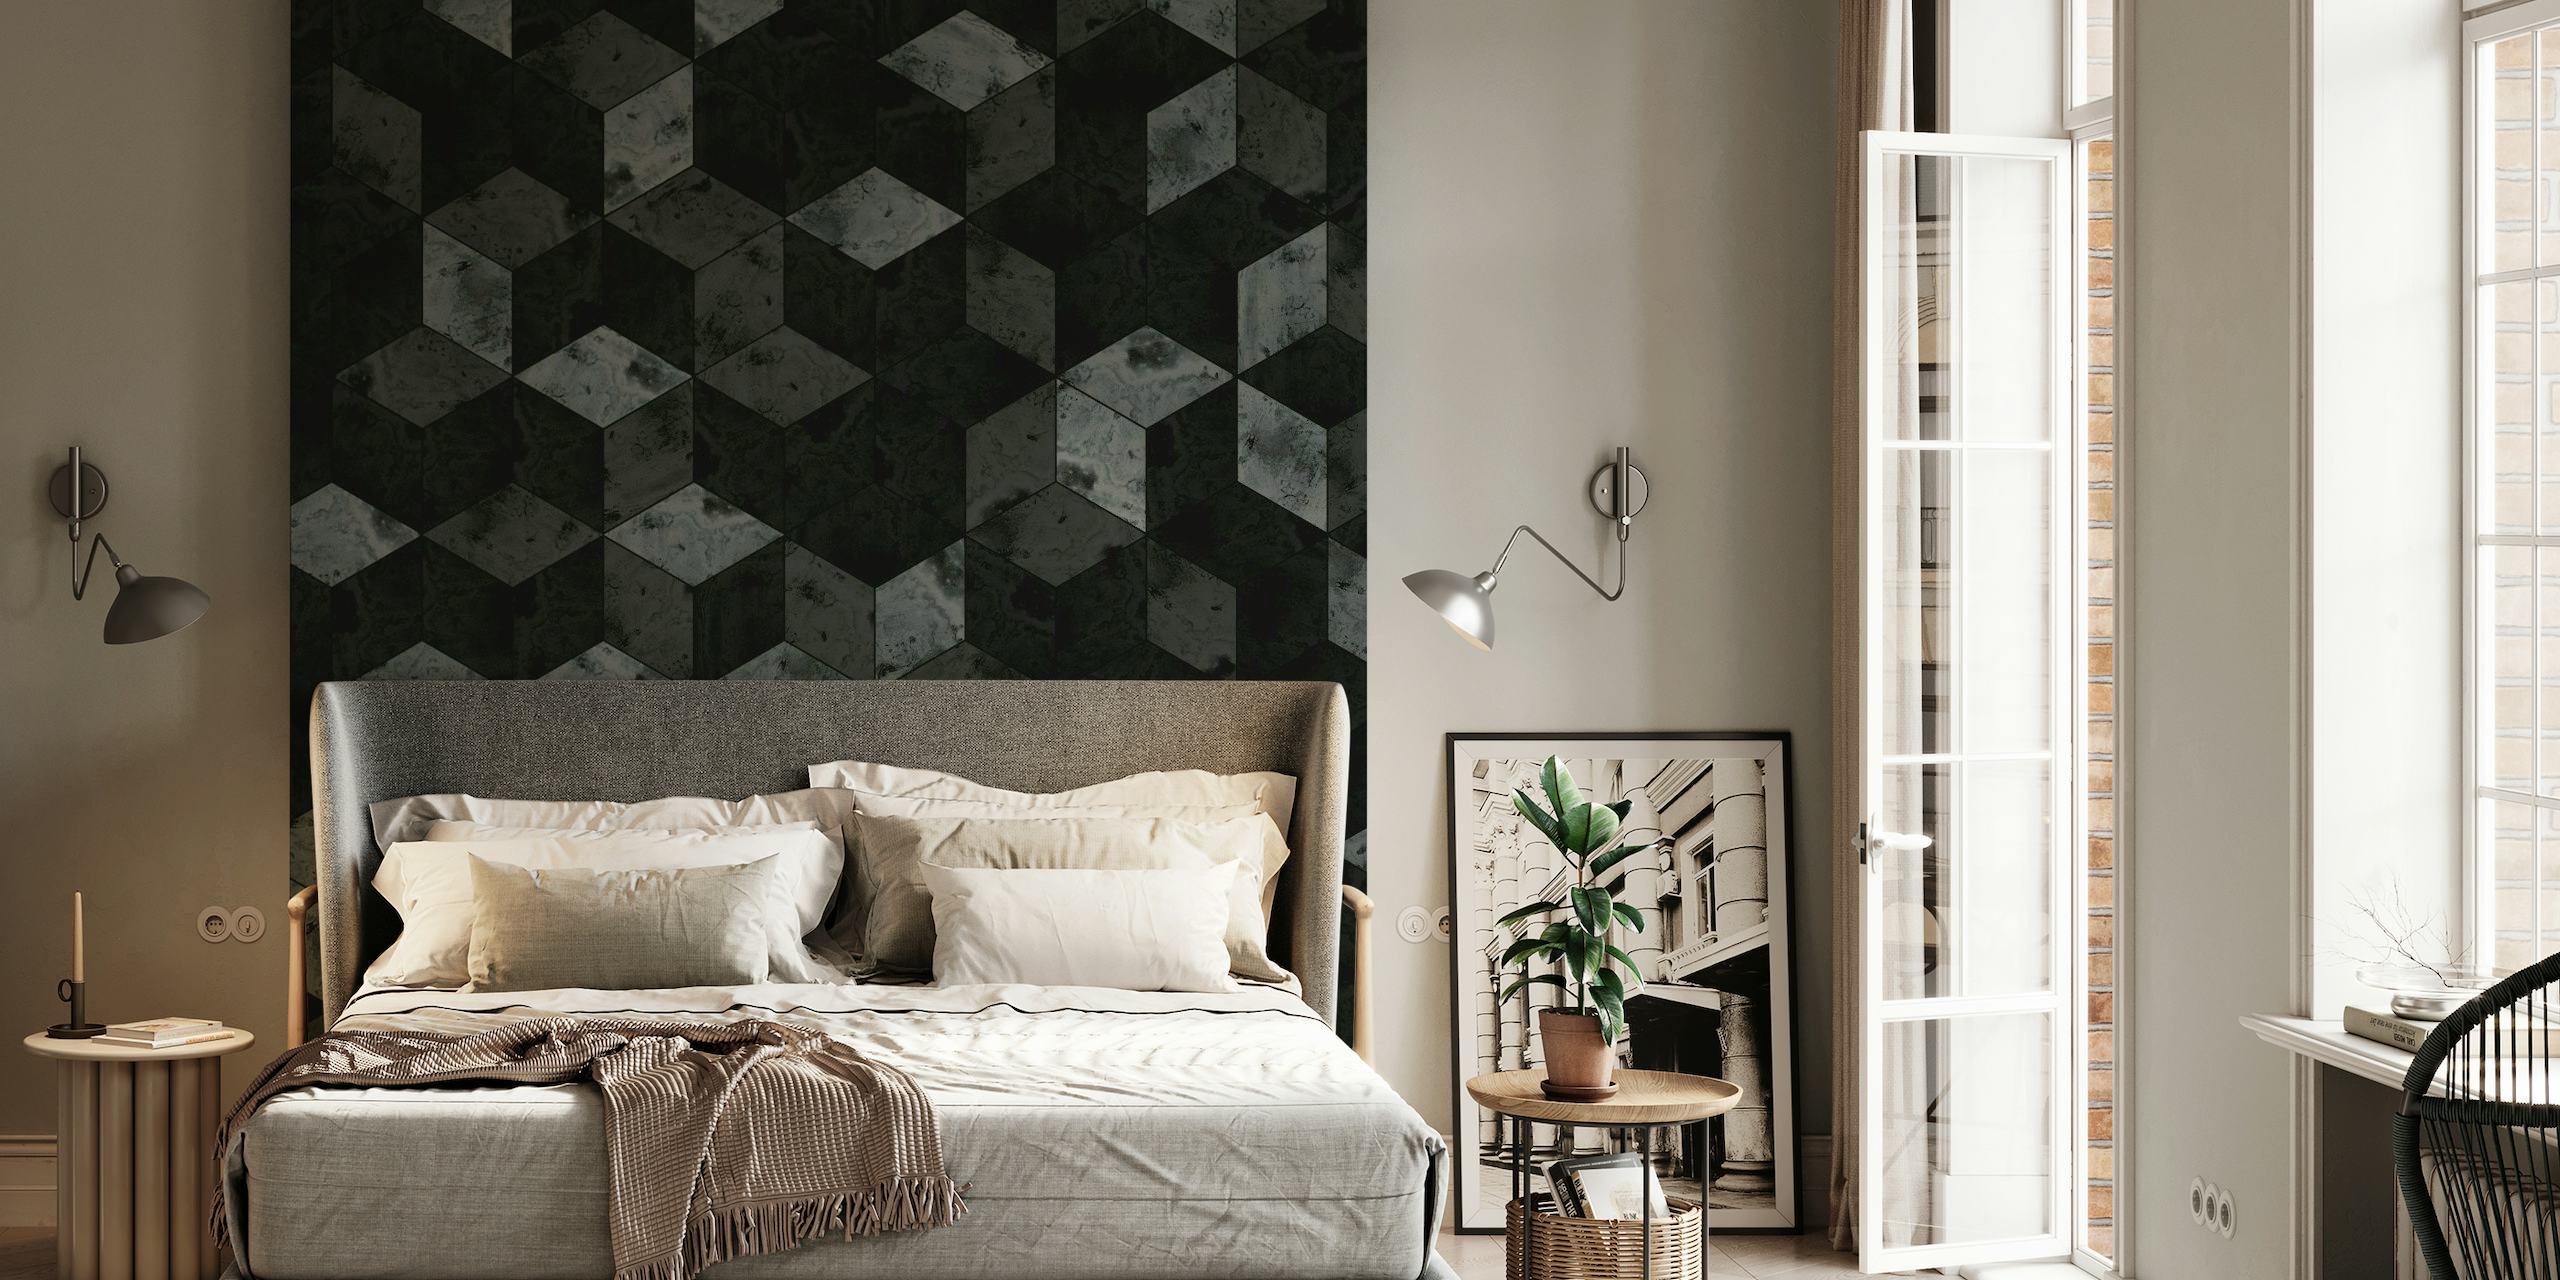 Dark Marble Cubes wall mural with geometric 3D design in shades of black and gray